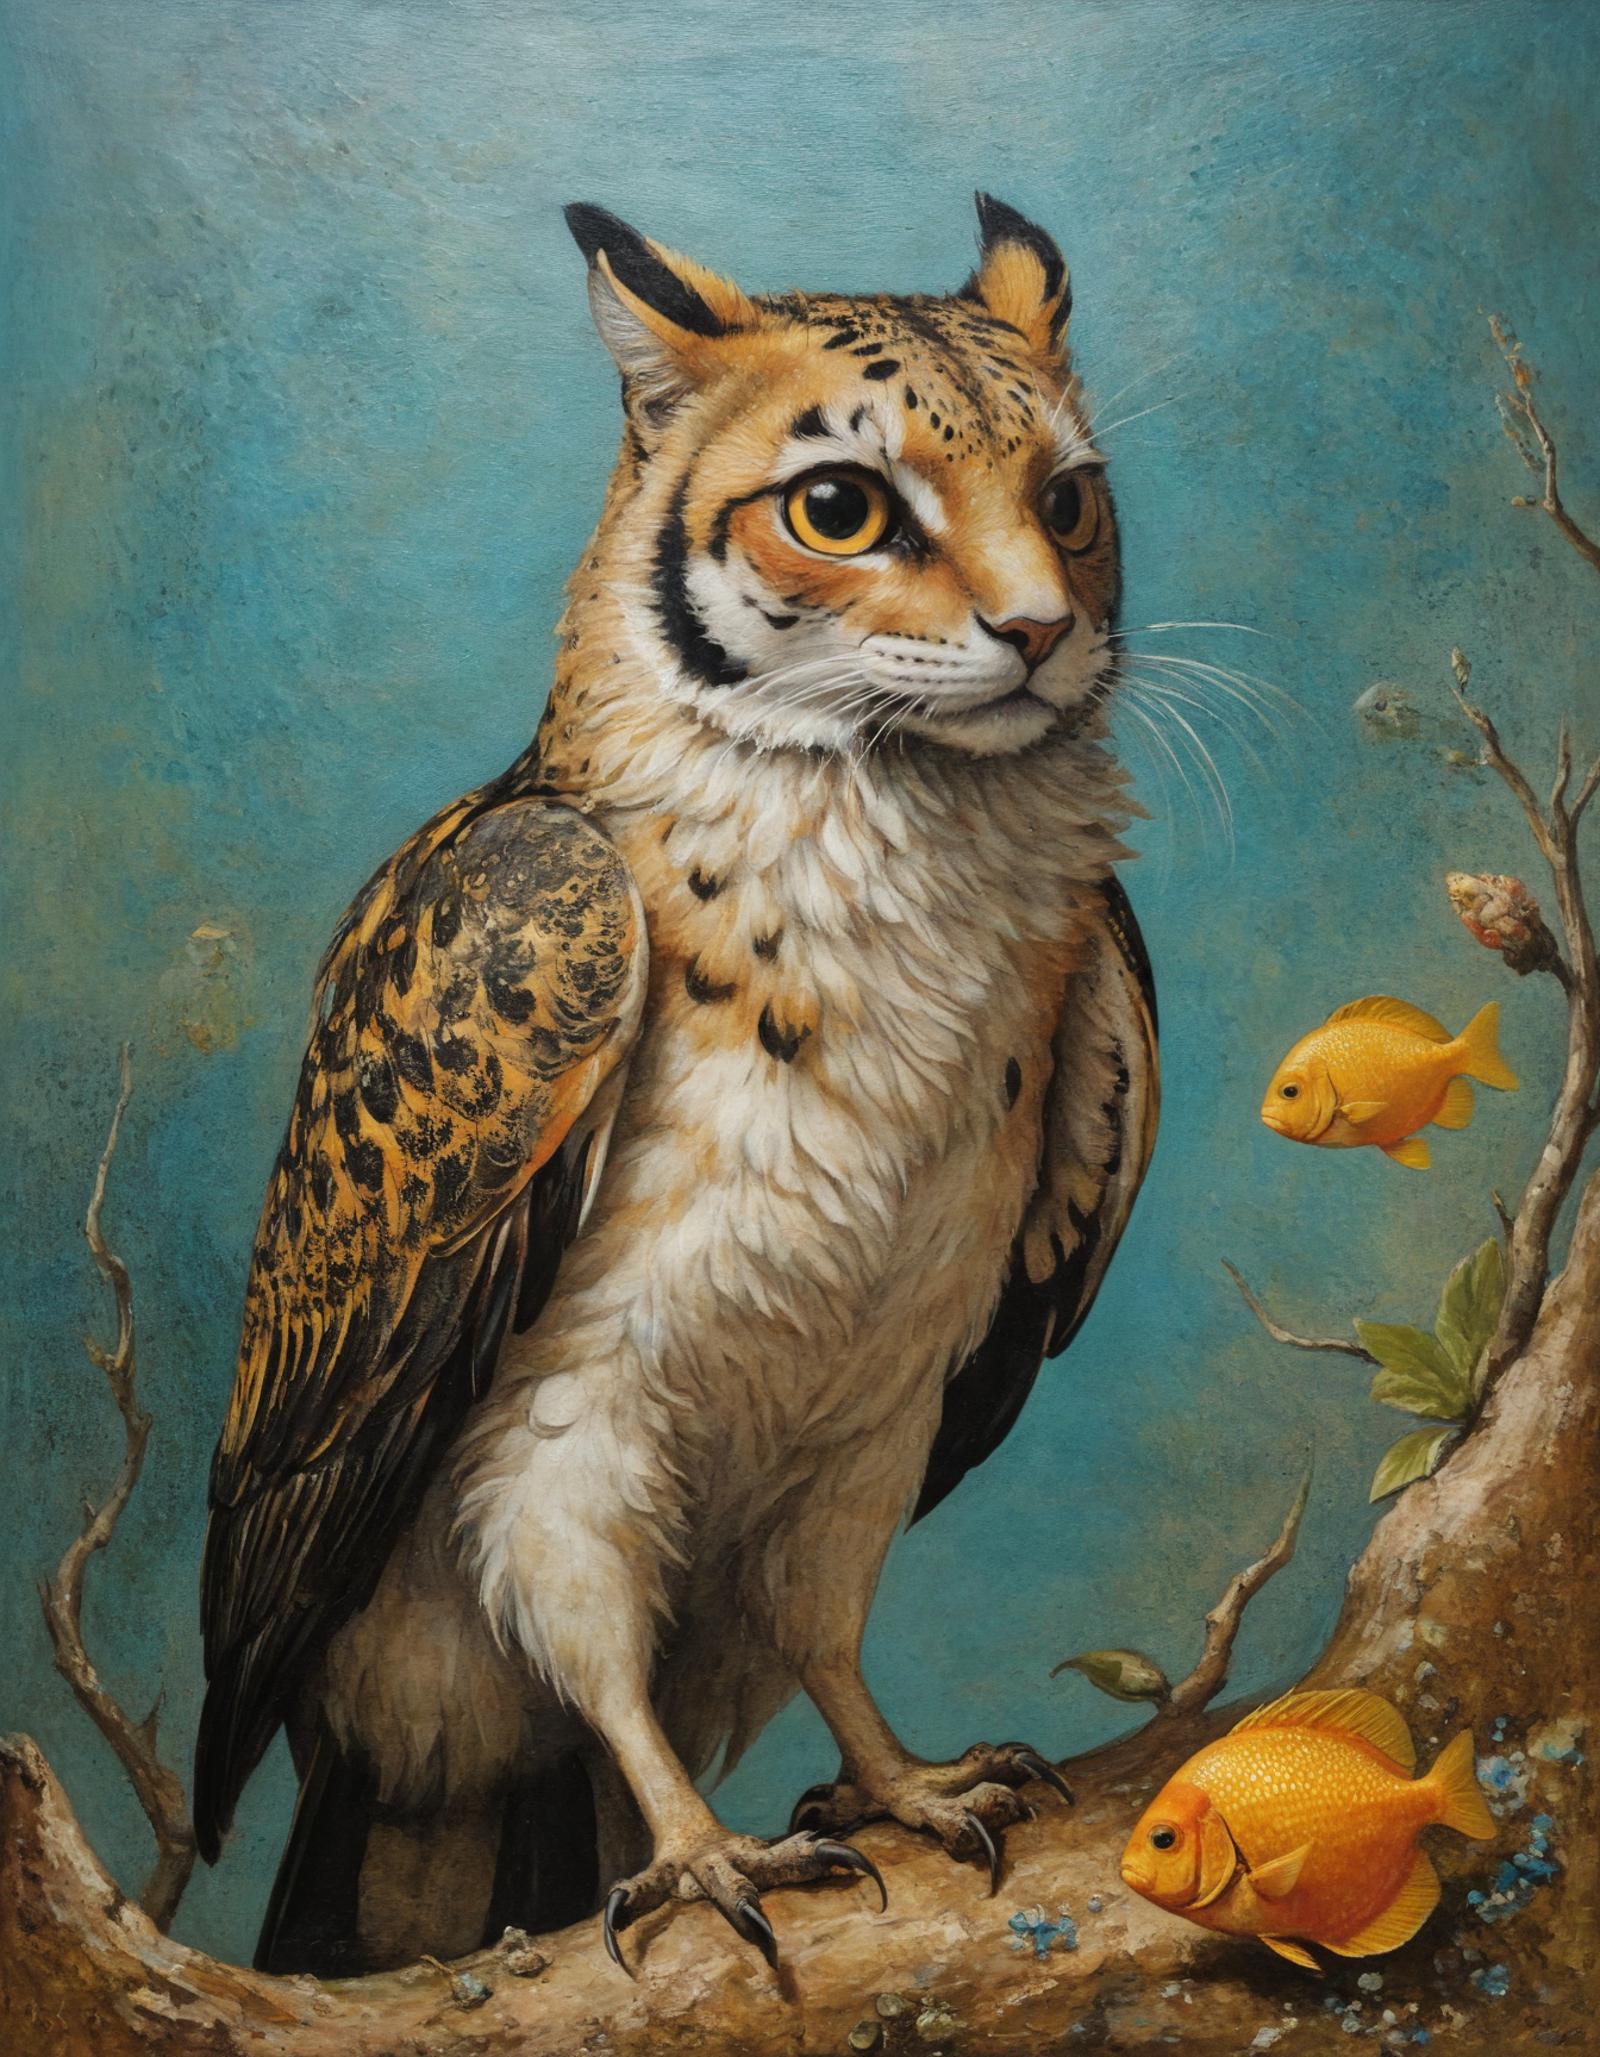 A painting of a bird of prey perched on a branch with a fish and a bird in the background.